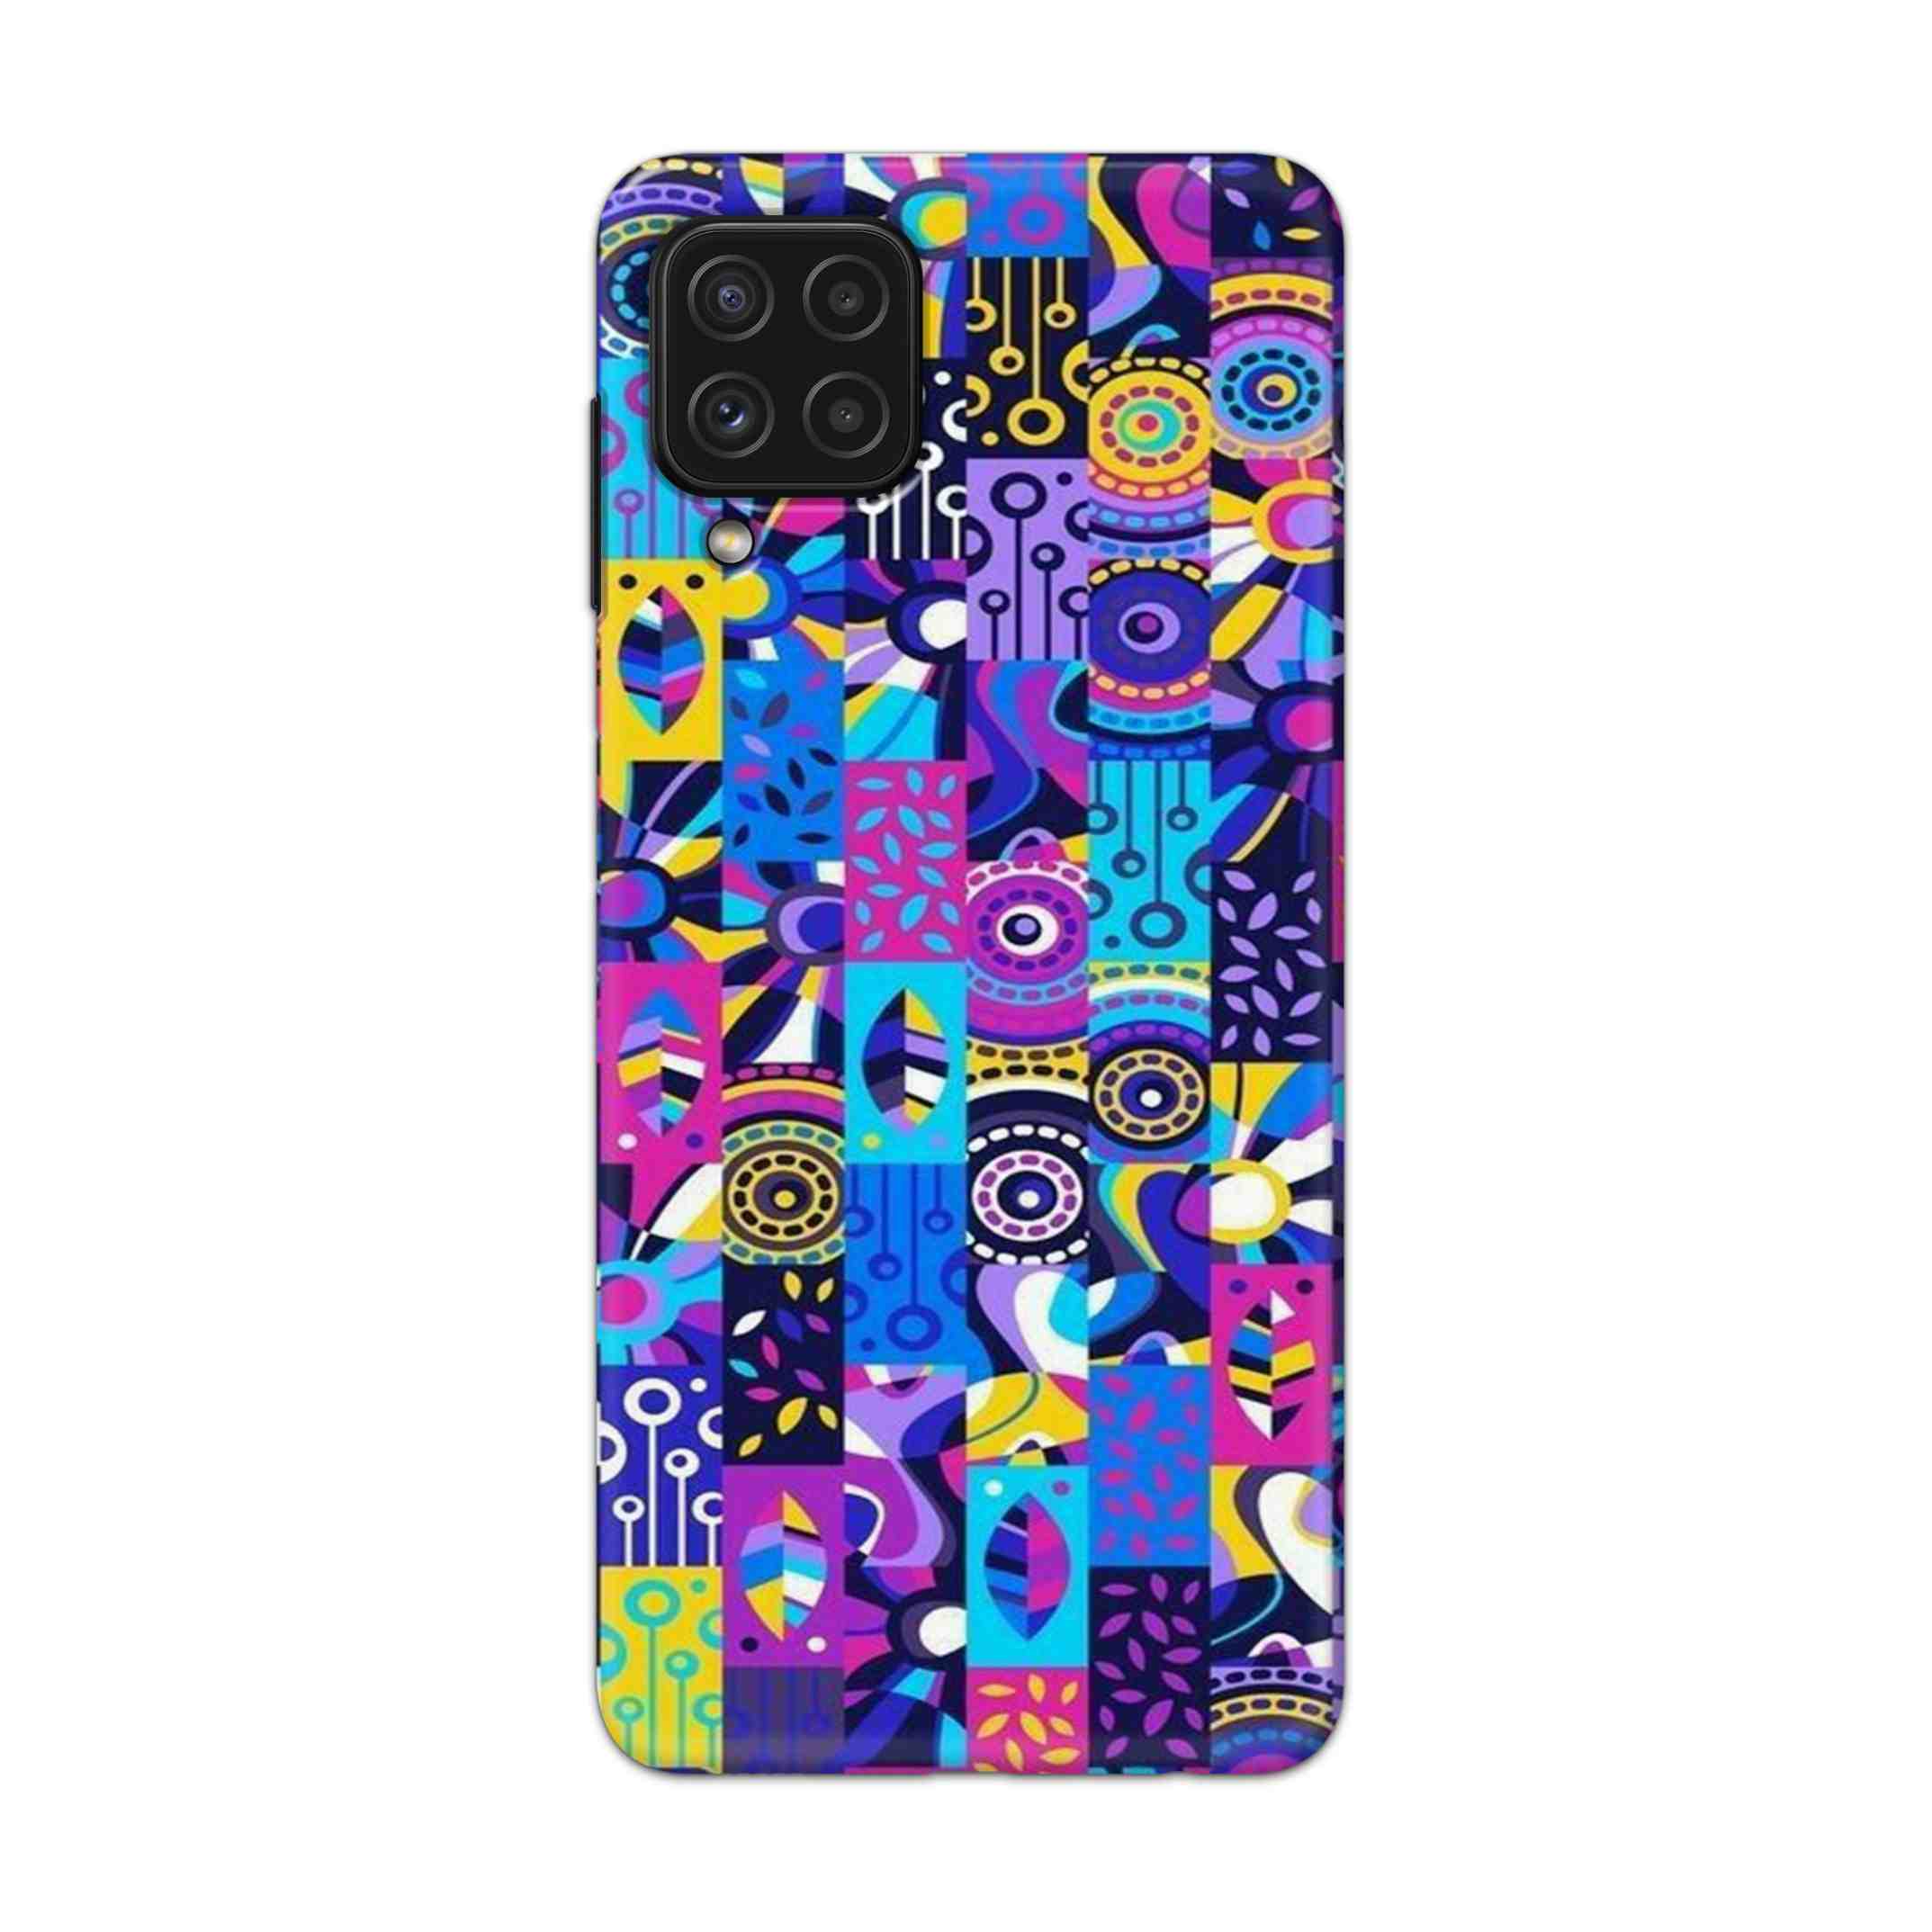 Buy Rainbow Art Hard Back Mobile Phone Case Cover For Samsung Galaxy A22 Online